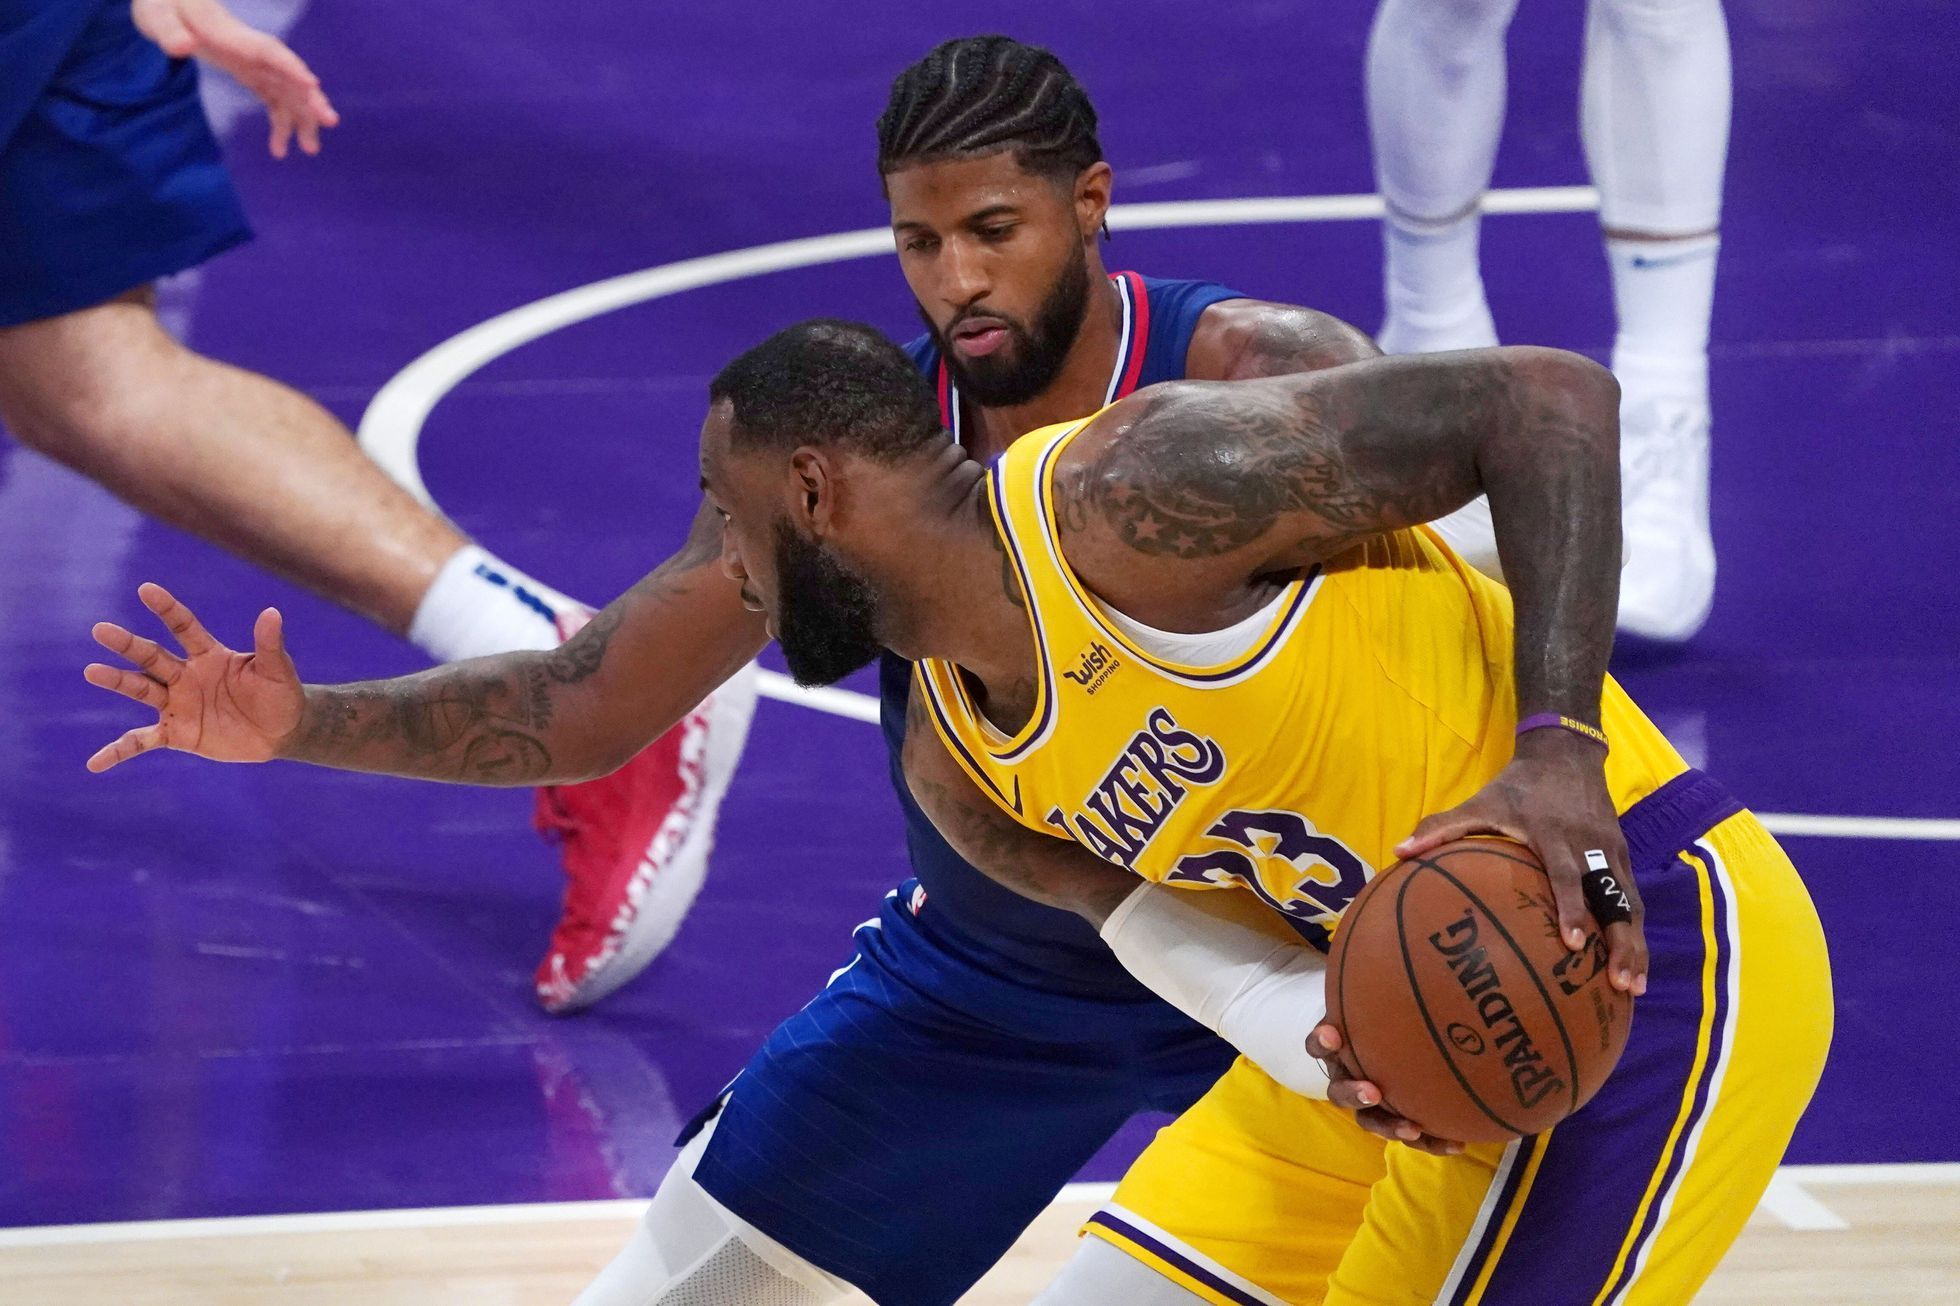 NBA: Los Angeles Clippers at Los Angeles Lakers